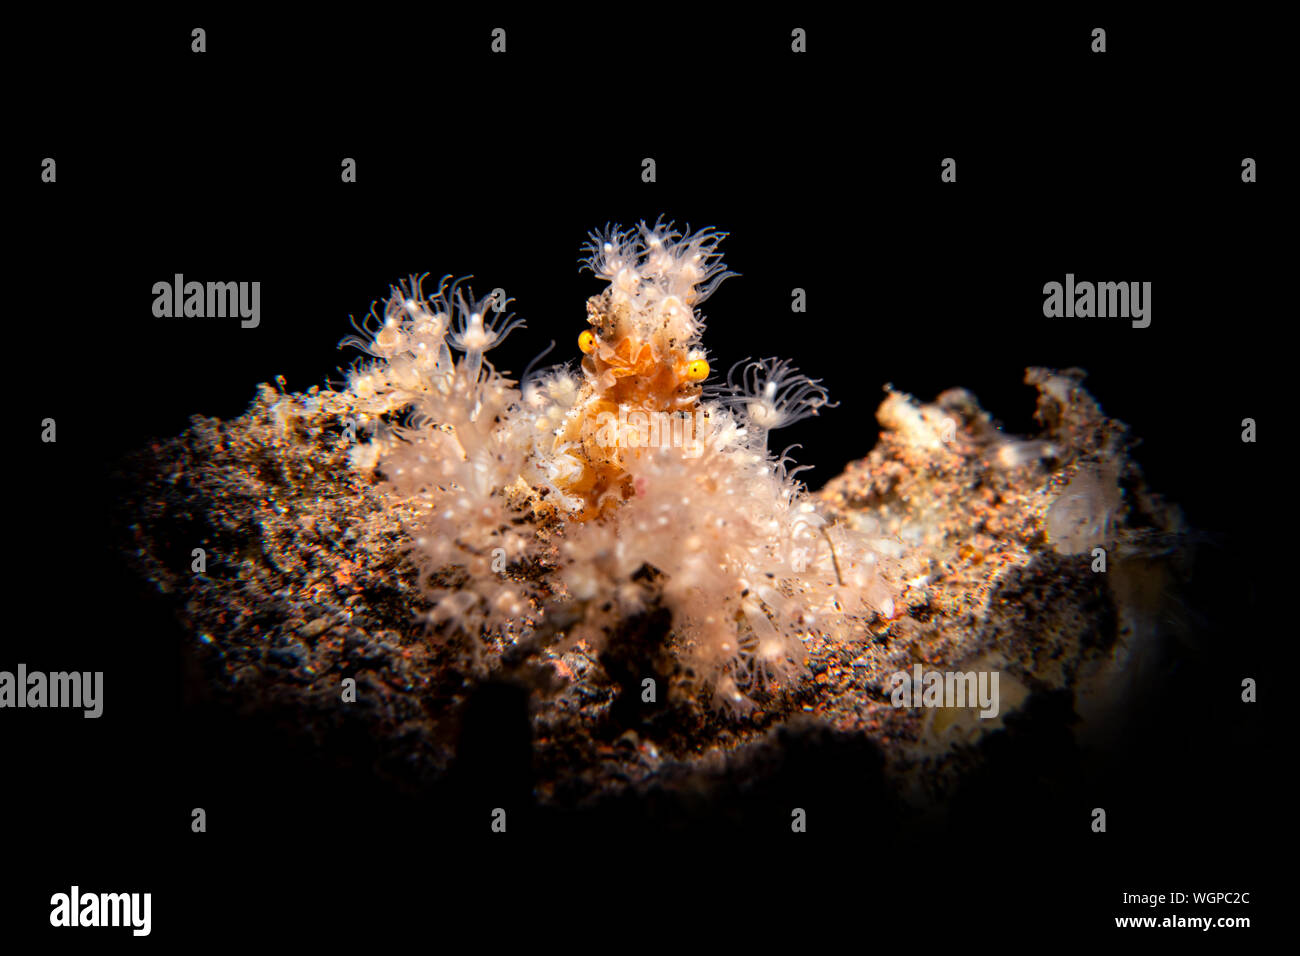 A hairy decorator crab sits motionless using its camouflage to make itself hard to see. Stock Photo